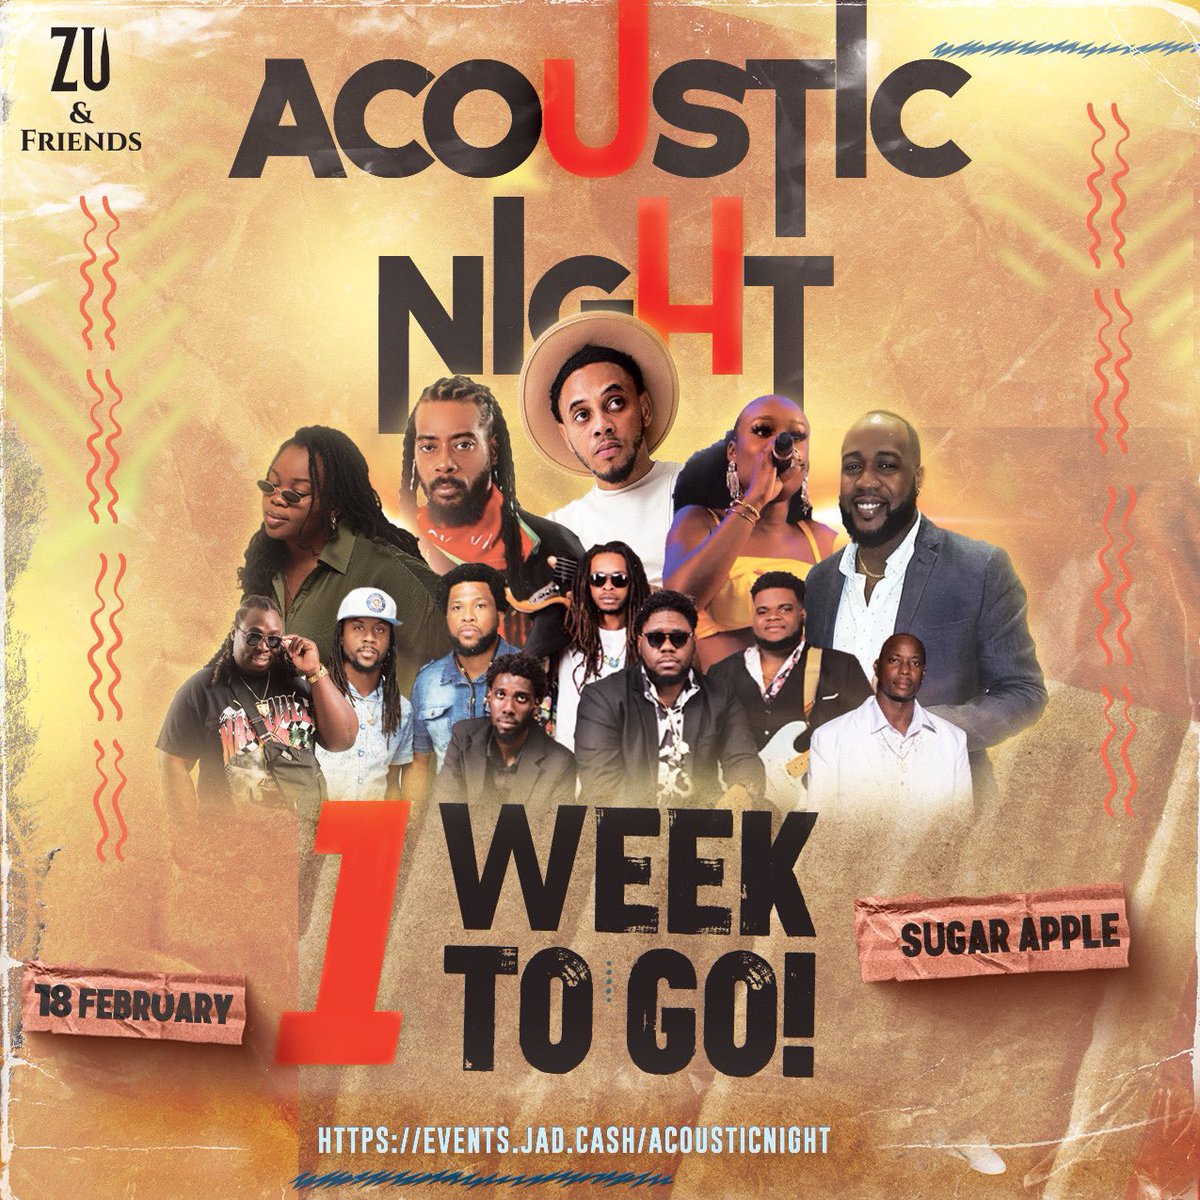 Counting down the days to a soulful serenade – one week until the acoustic magic begins! Come vibe with Zu & Friends on February 18th. 🎶 #AnticipationBuilding #getyourtickets
@jusjadeskn 
🎟️ Link in bio events.jad.cash/acousticnight
📍 Sugar Apple 
👗 👕 Garden Chic